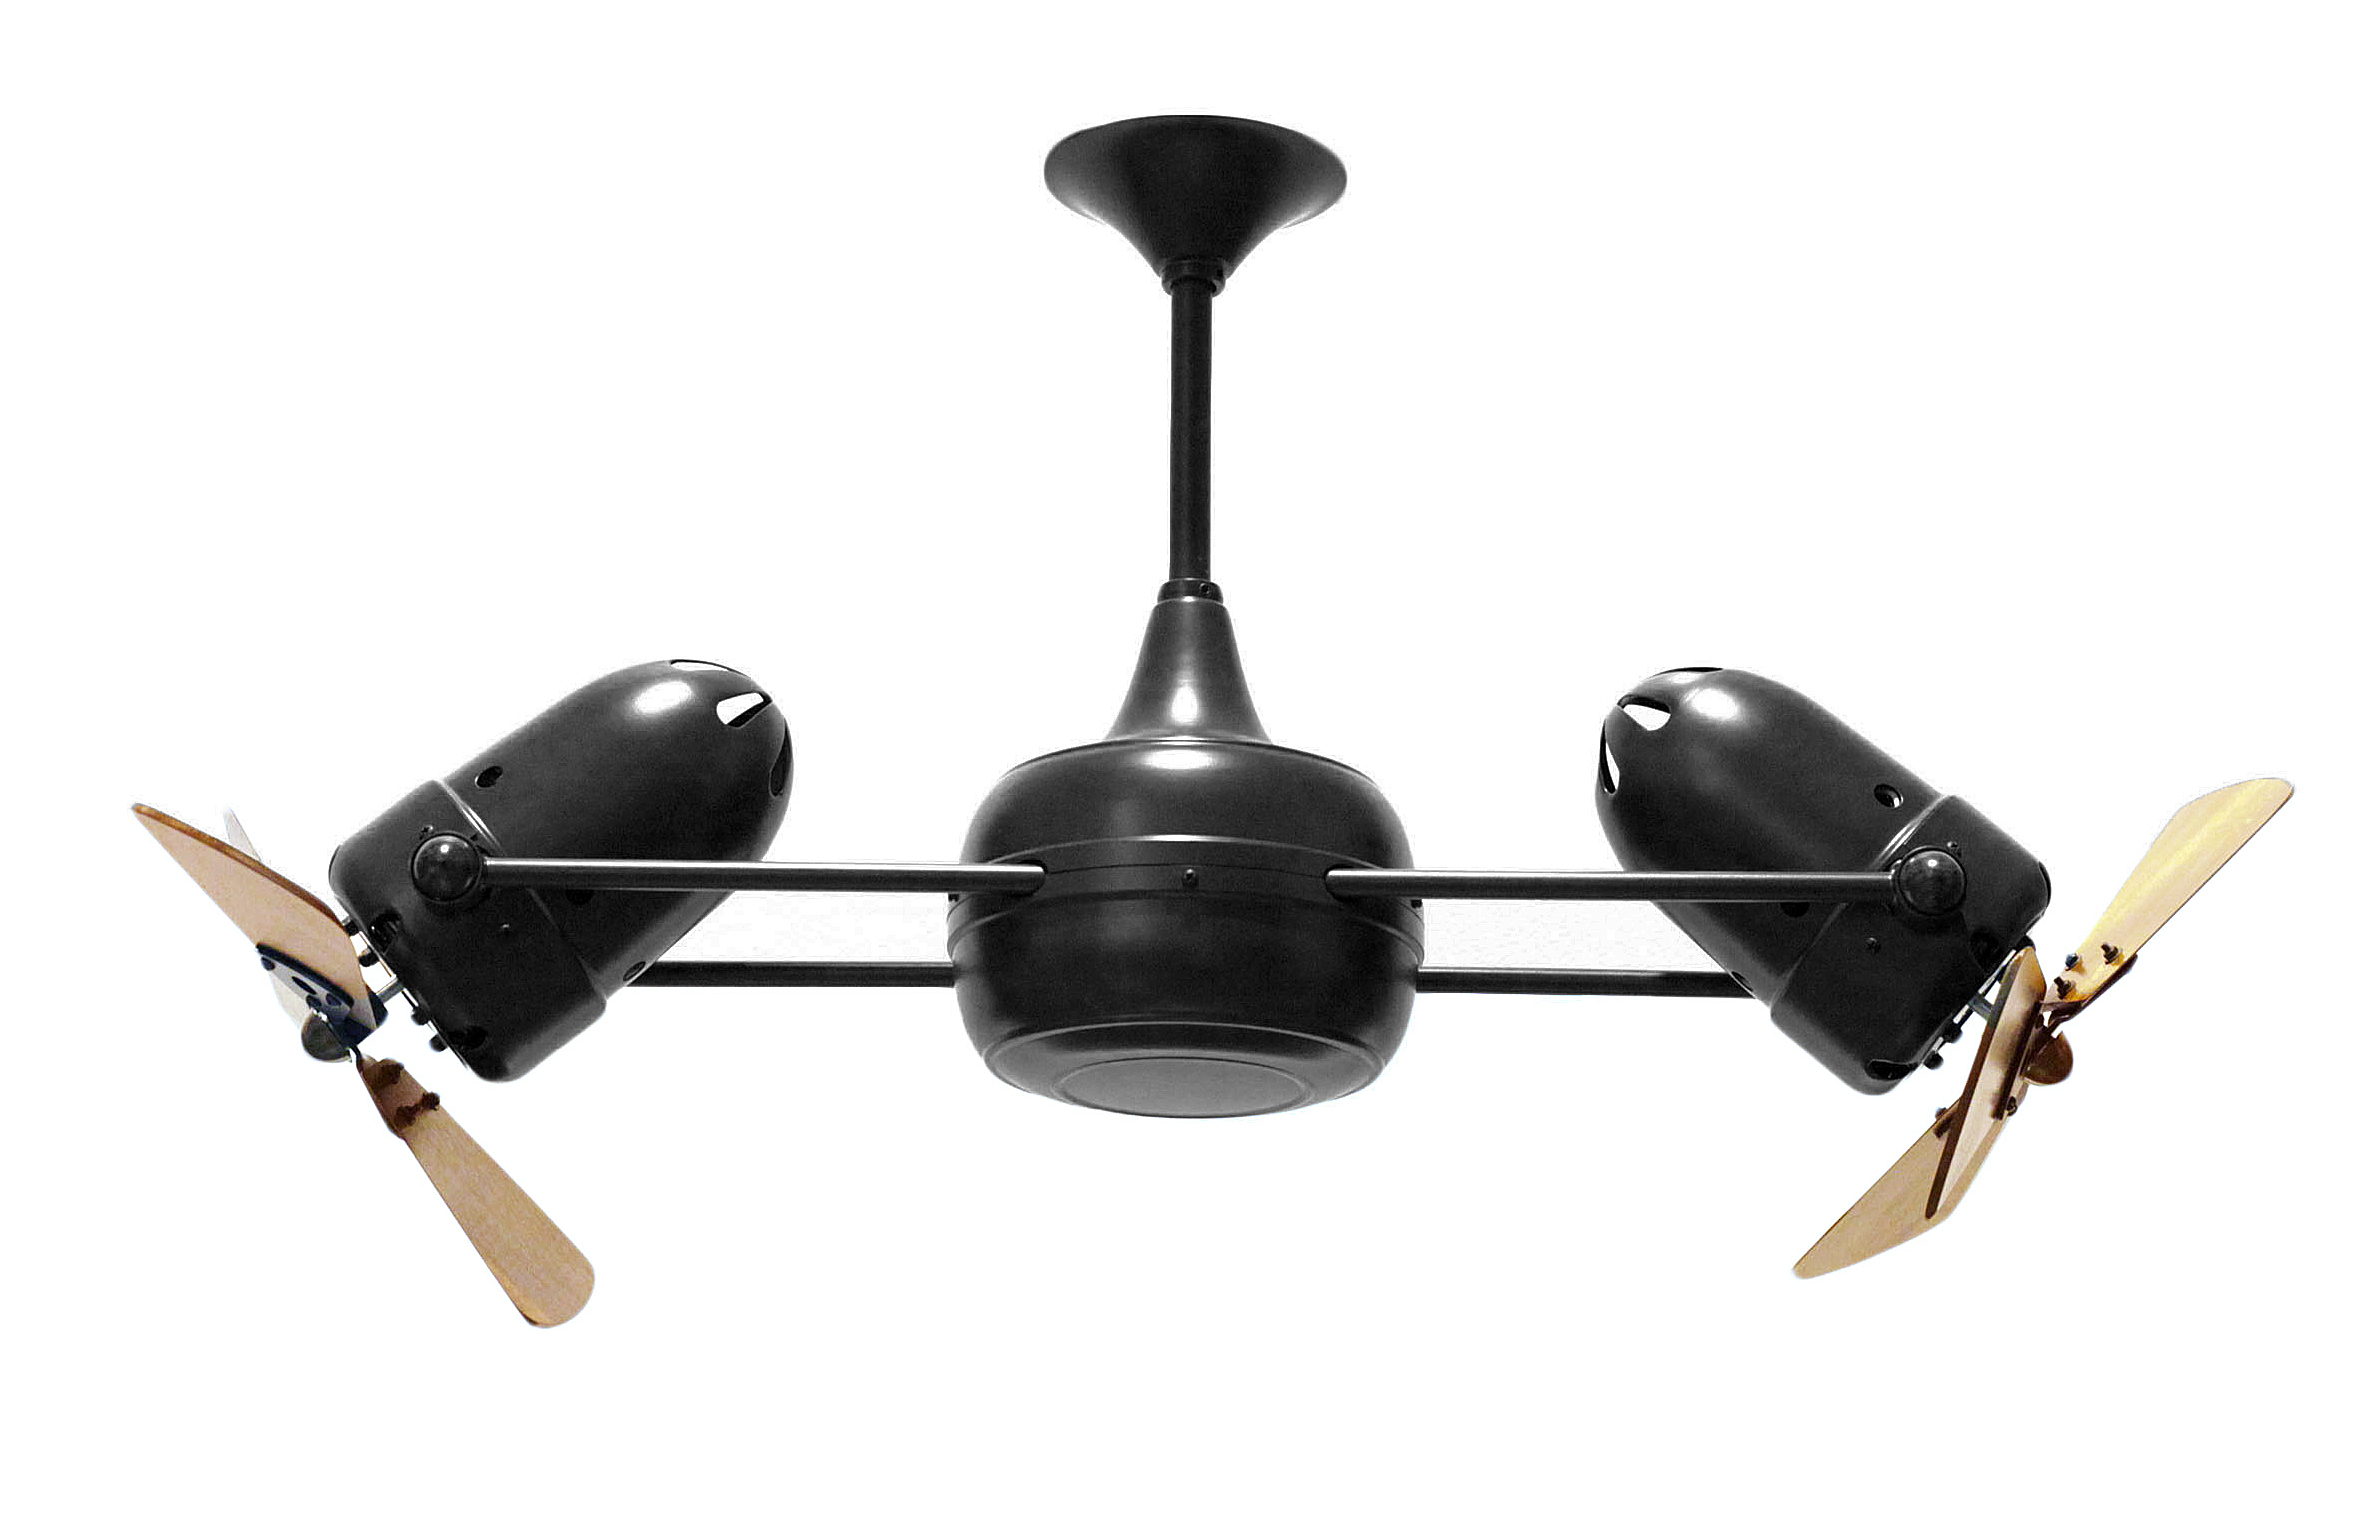 Duplo Dinamico Rotational Dual Head Ceiling Fan in Black Finish with Mahogany Wood Blades